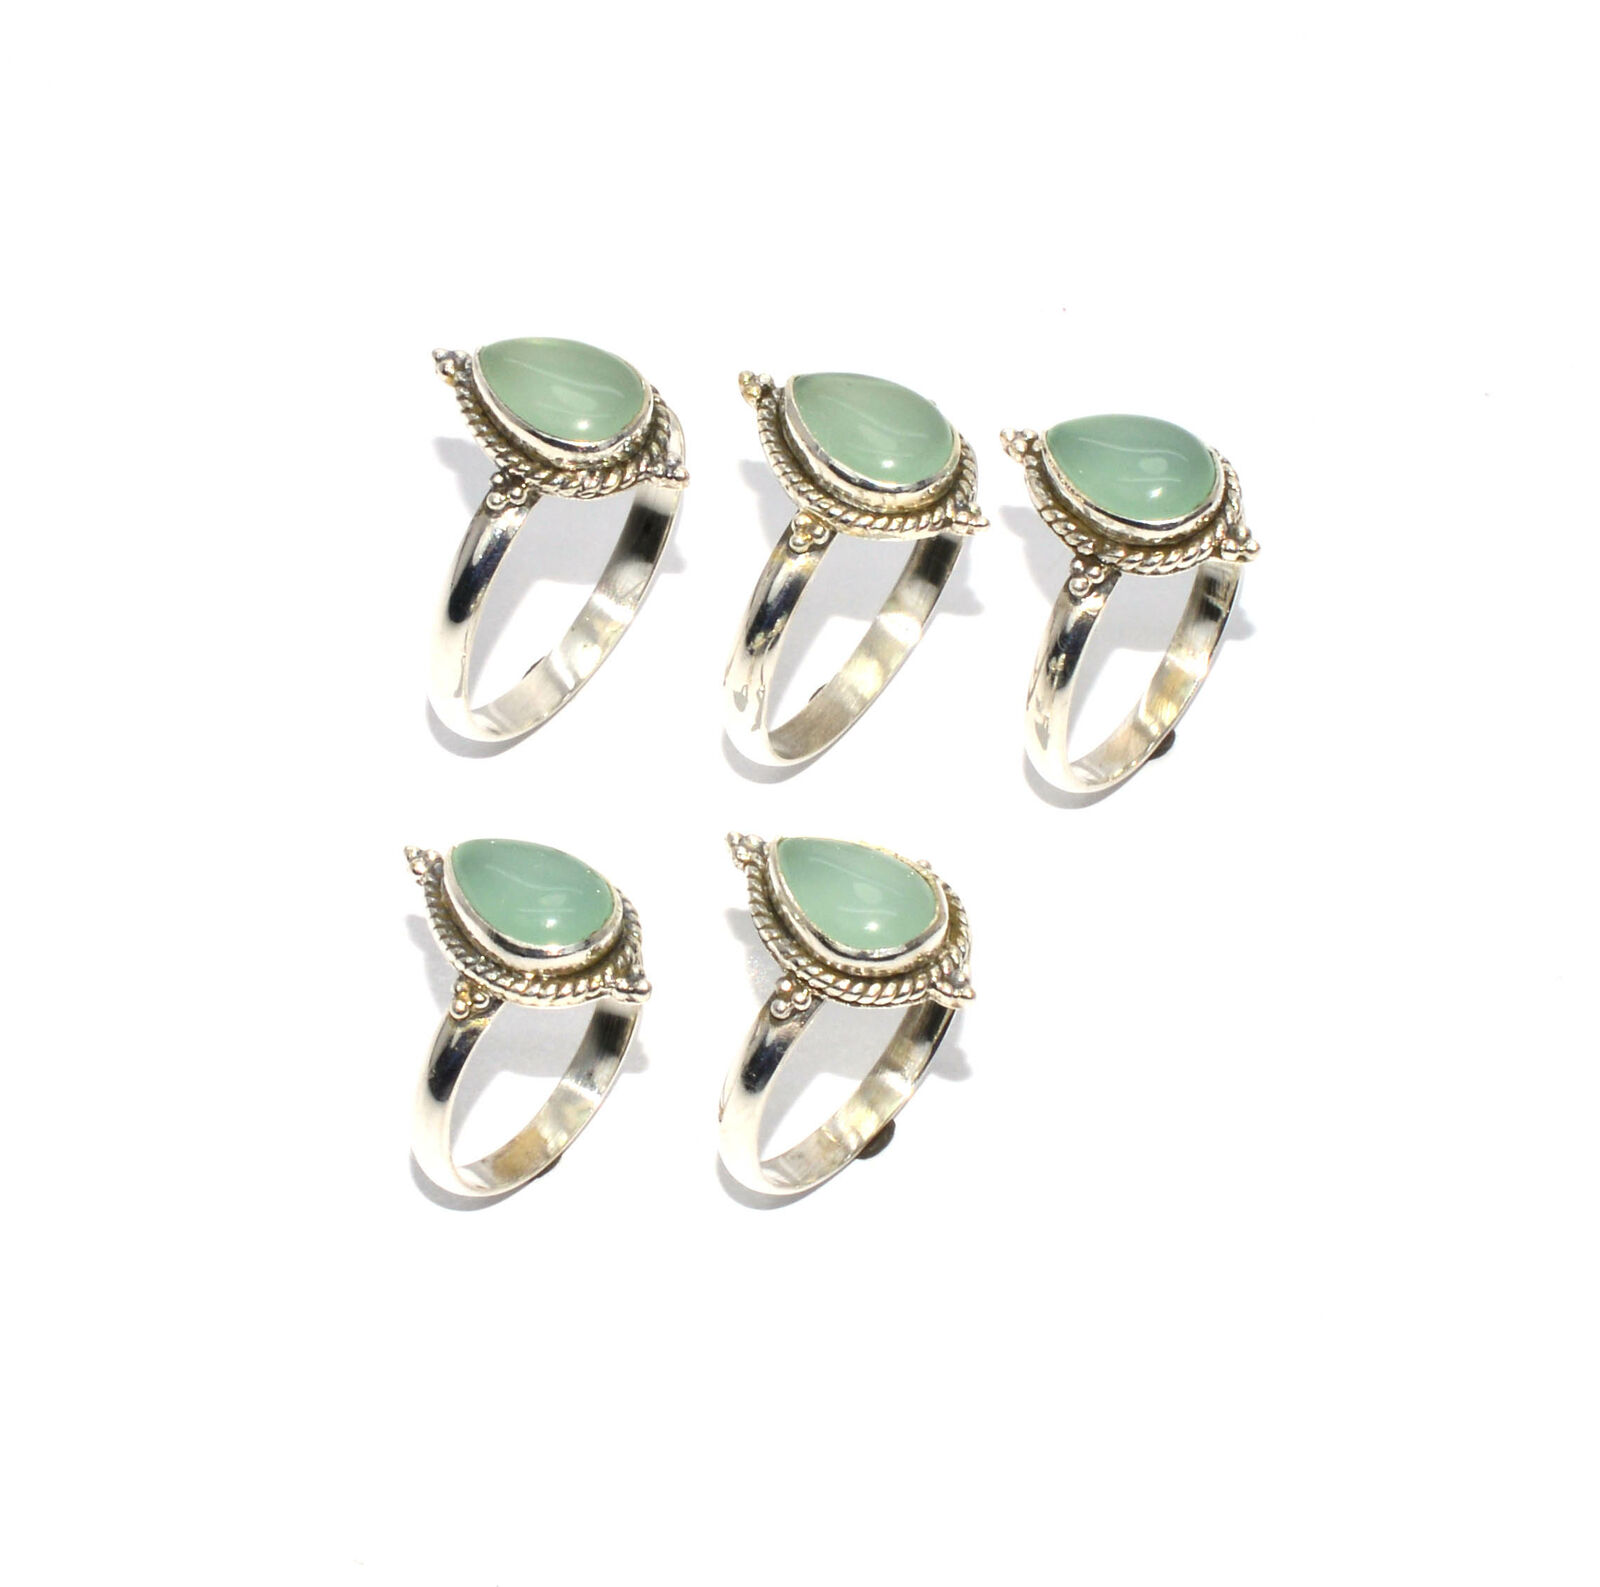 Wholesale 5pc 925 Solid Sterling Silver Aqua Chalcedony Ring Lot Z663